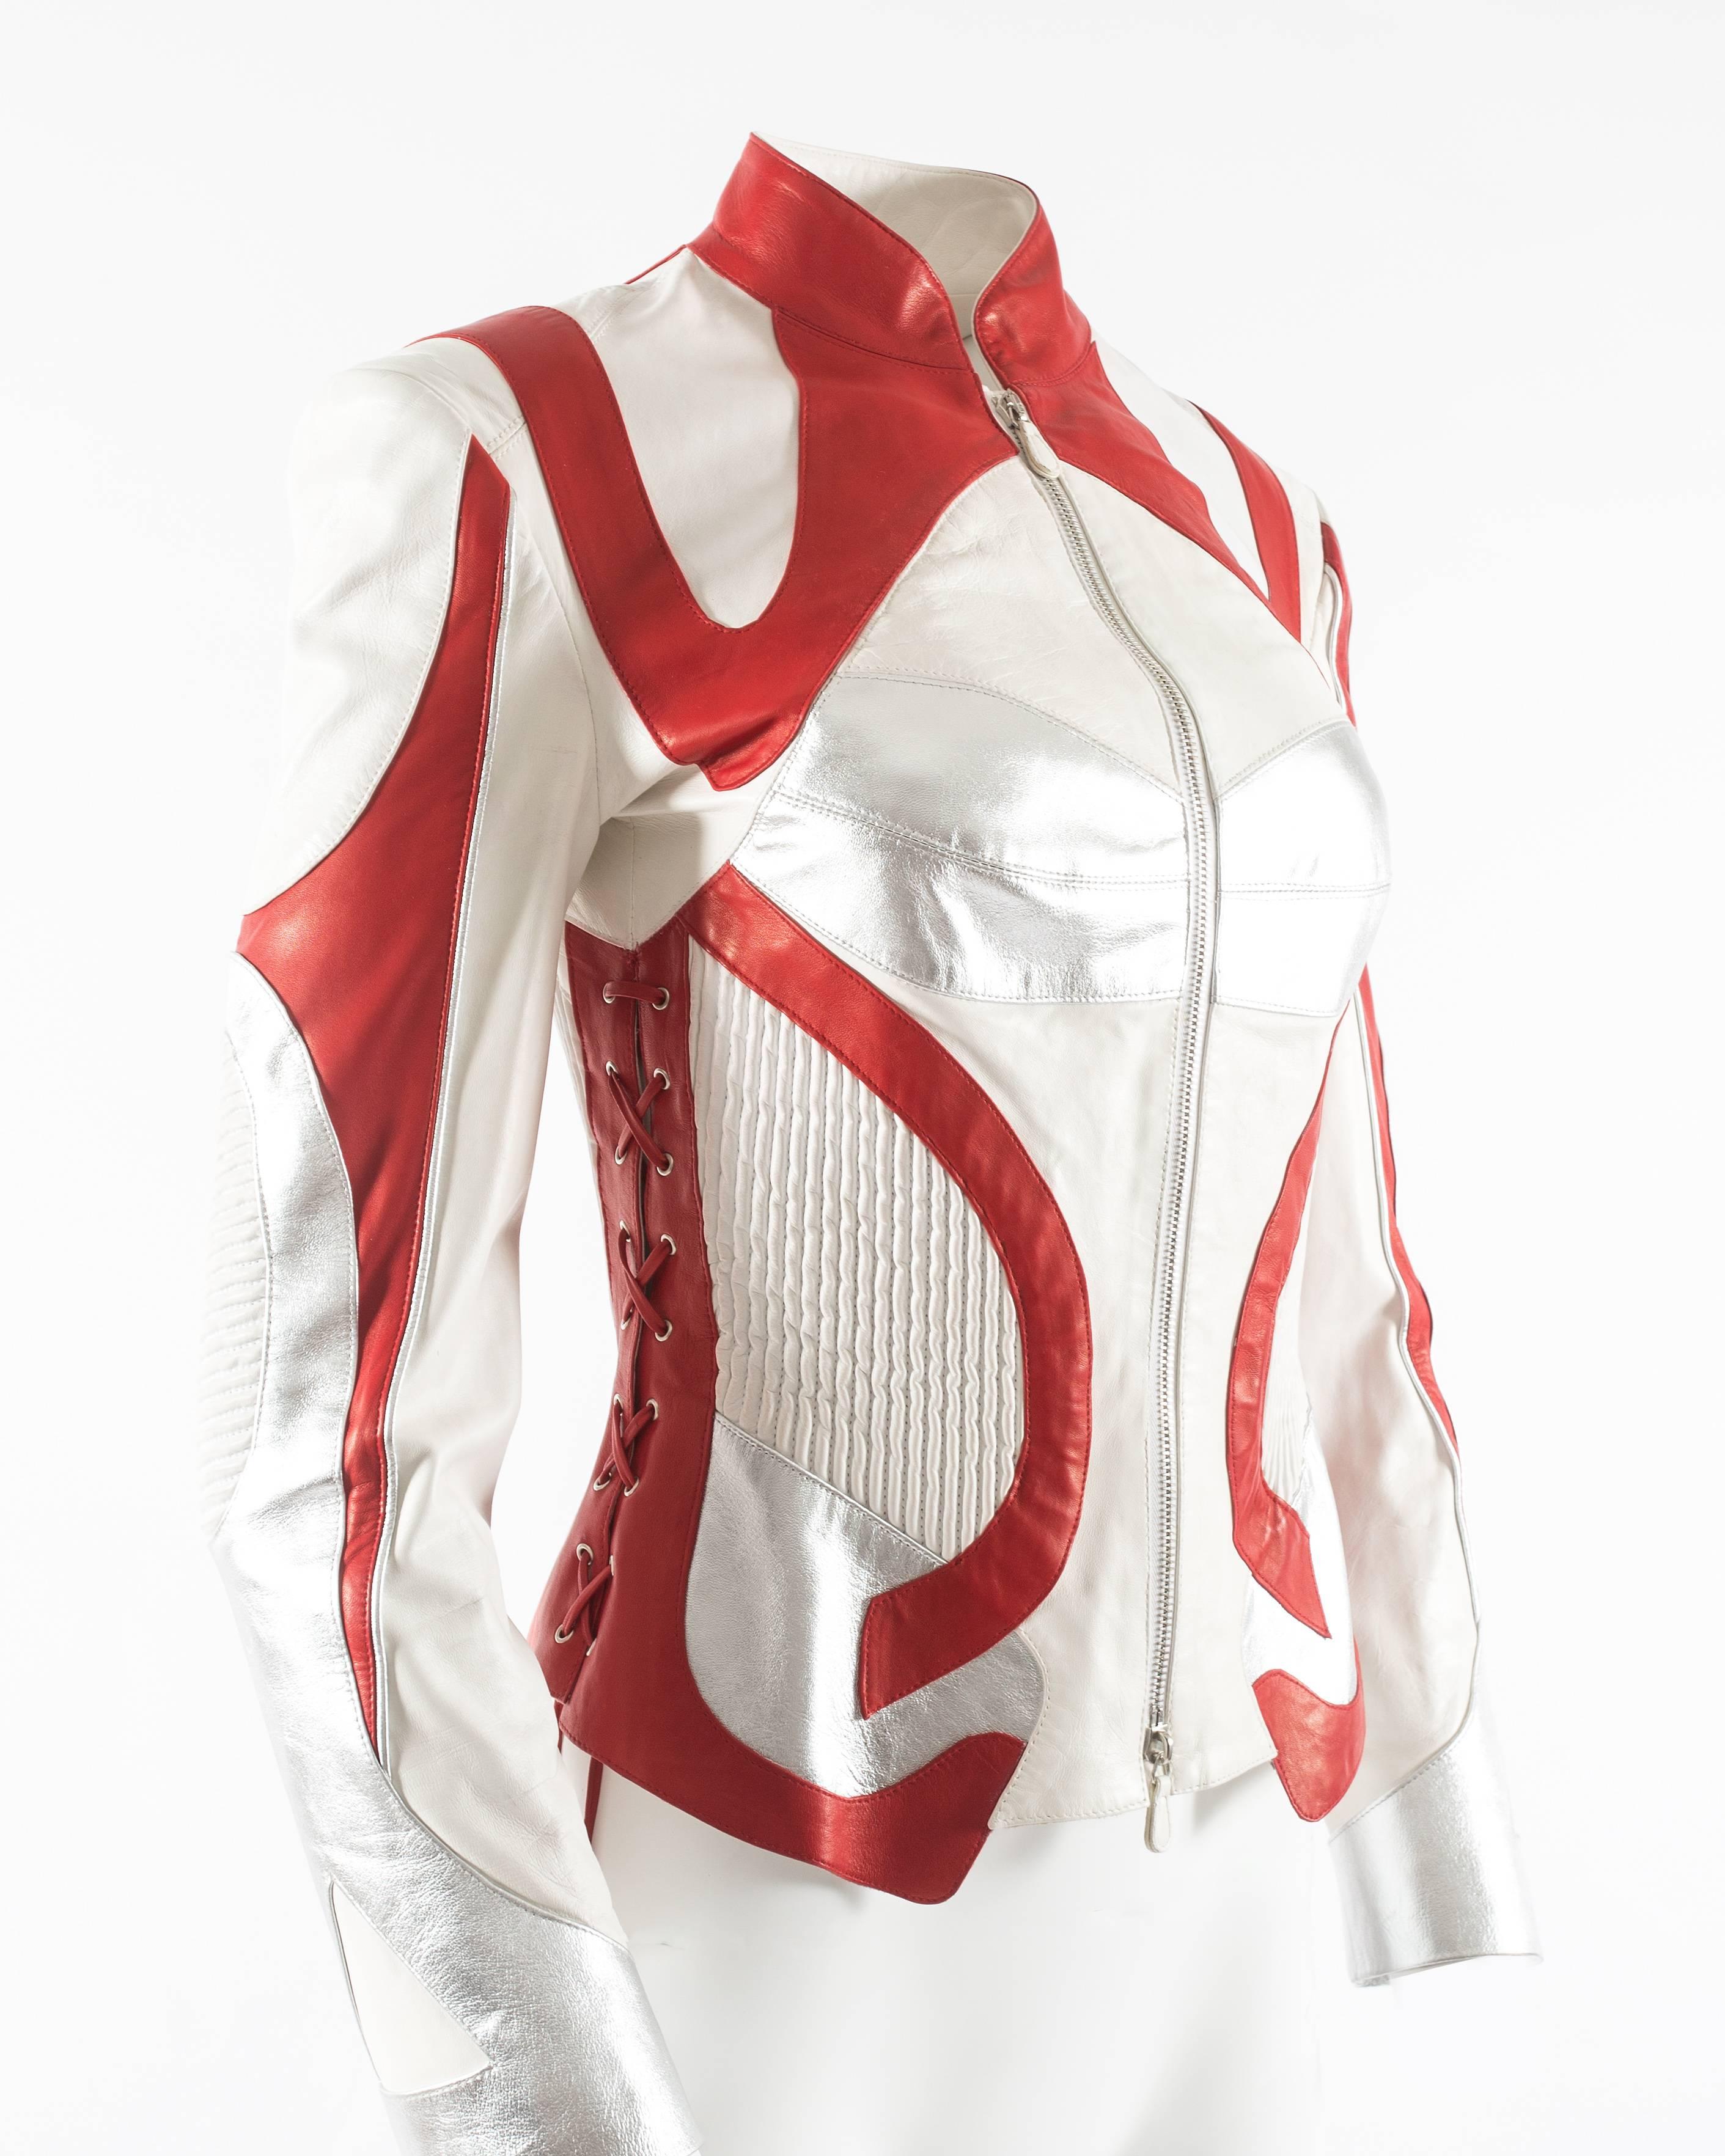 Alexander McQueen Autumn-Winter 2003 leather biker jacket

- White, silver and red leather
- lace up fastening on the sides
- metal zip closure at the front
- ribbed panels on waist
- 42% silk 58% polyester lining 